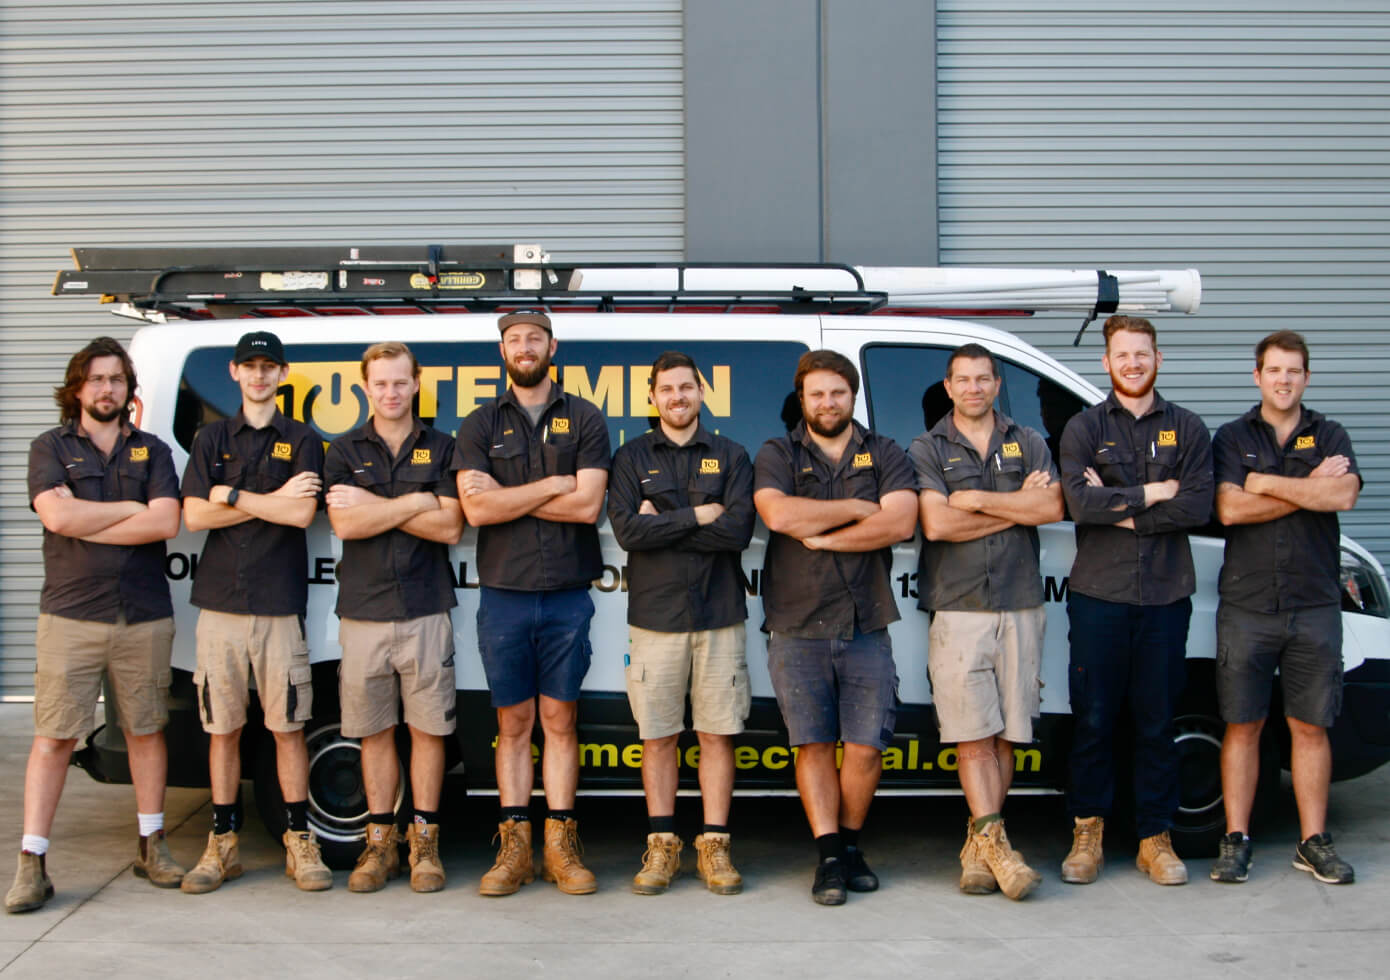 The Tenmen Electrical team of air conditioning technicians standing in front of their working van.